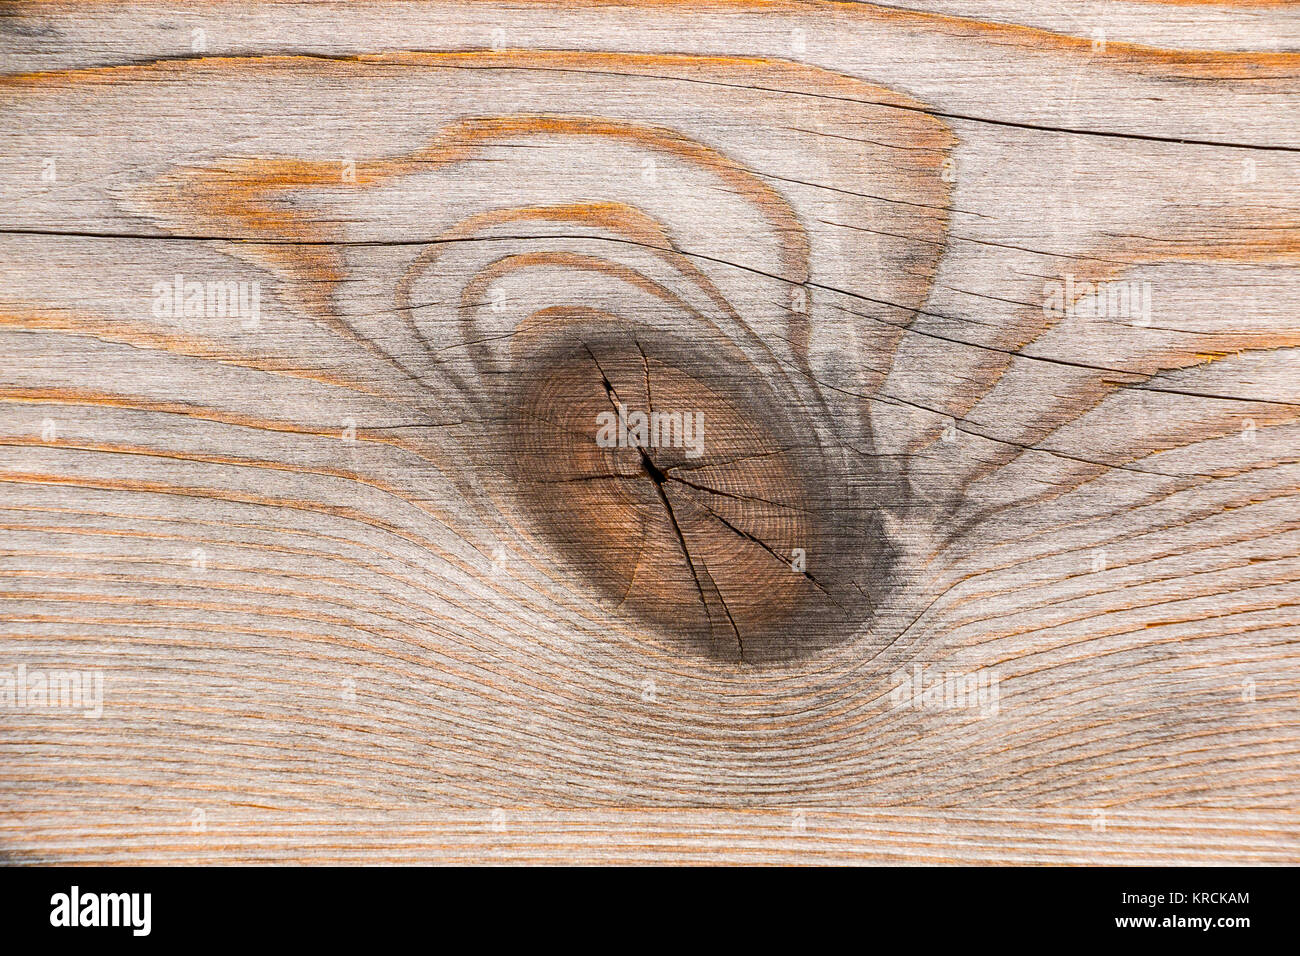 Wooden board with structures and dark knot Stock Photo